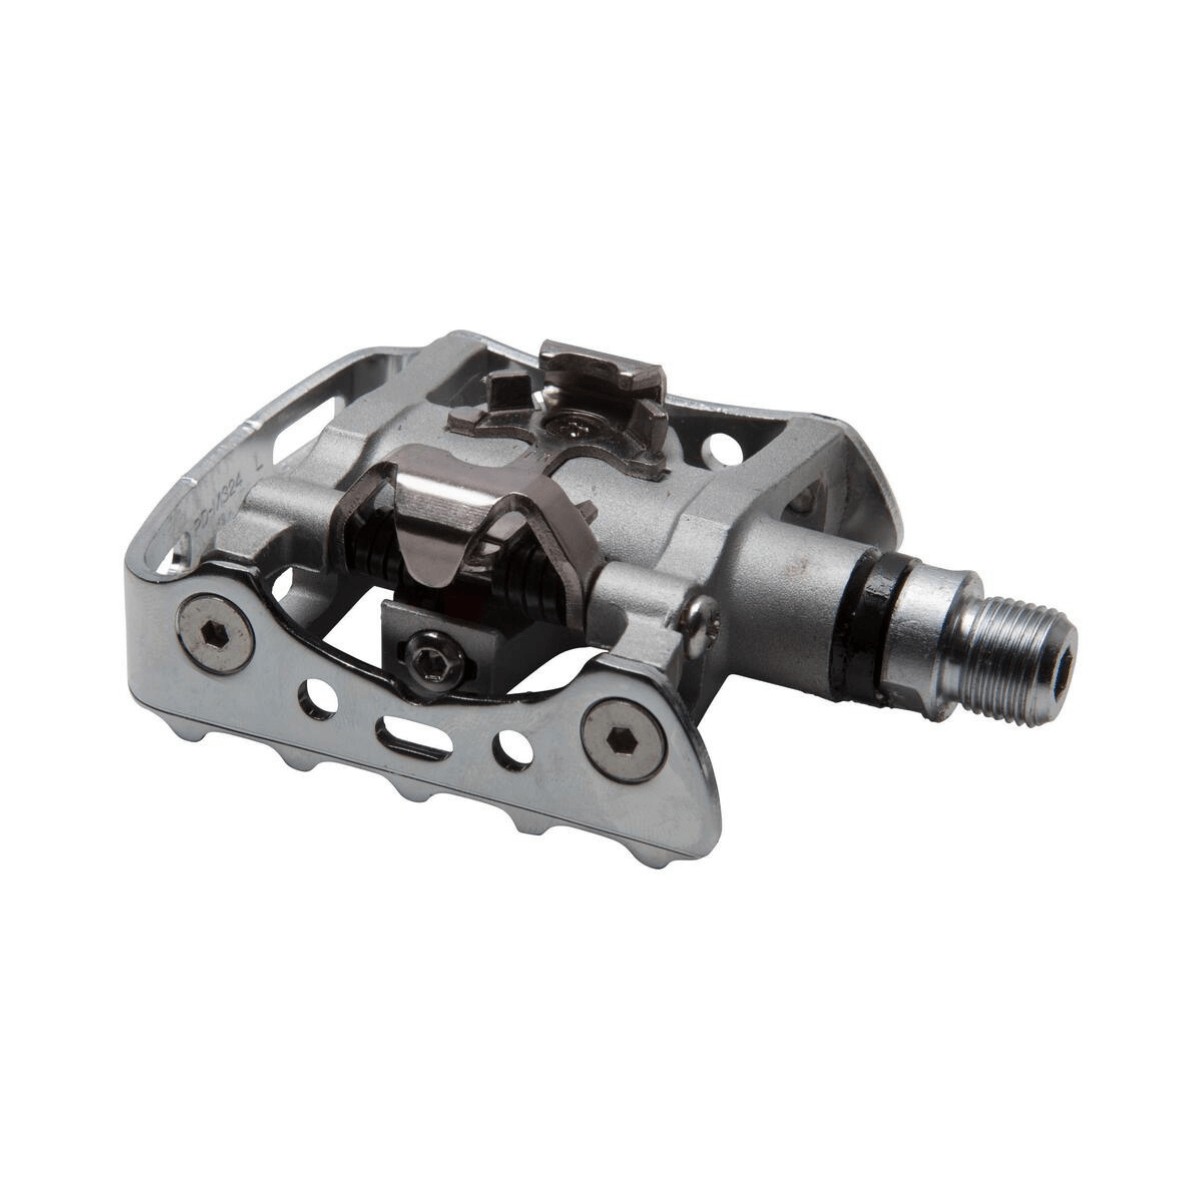 Shimano M324 SPD Pedale mit Cleats SM-SH56 Silber Bronze